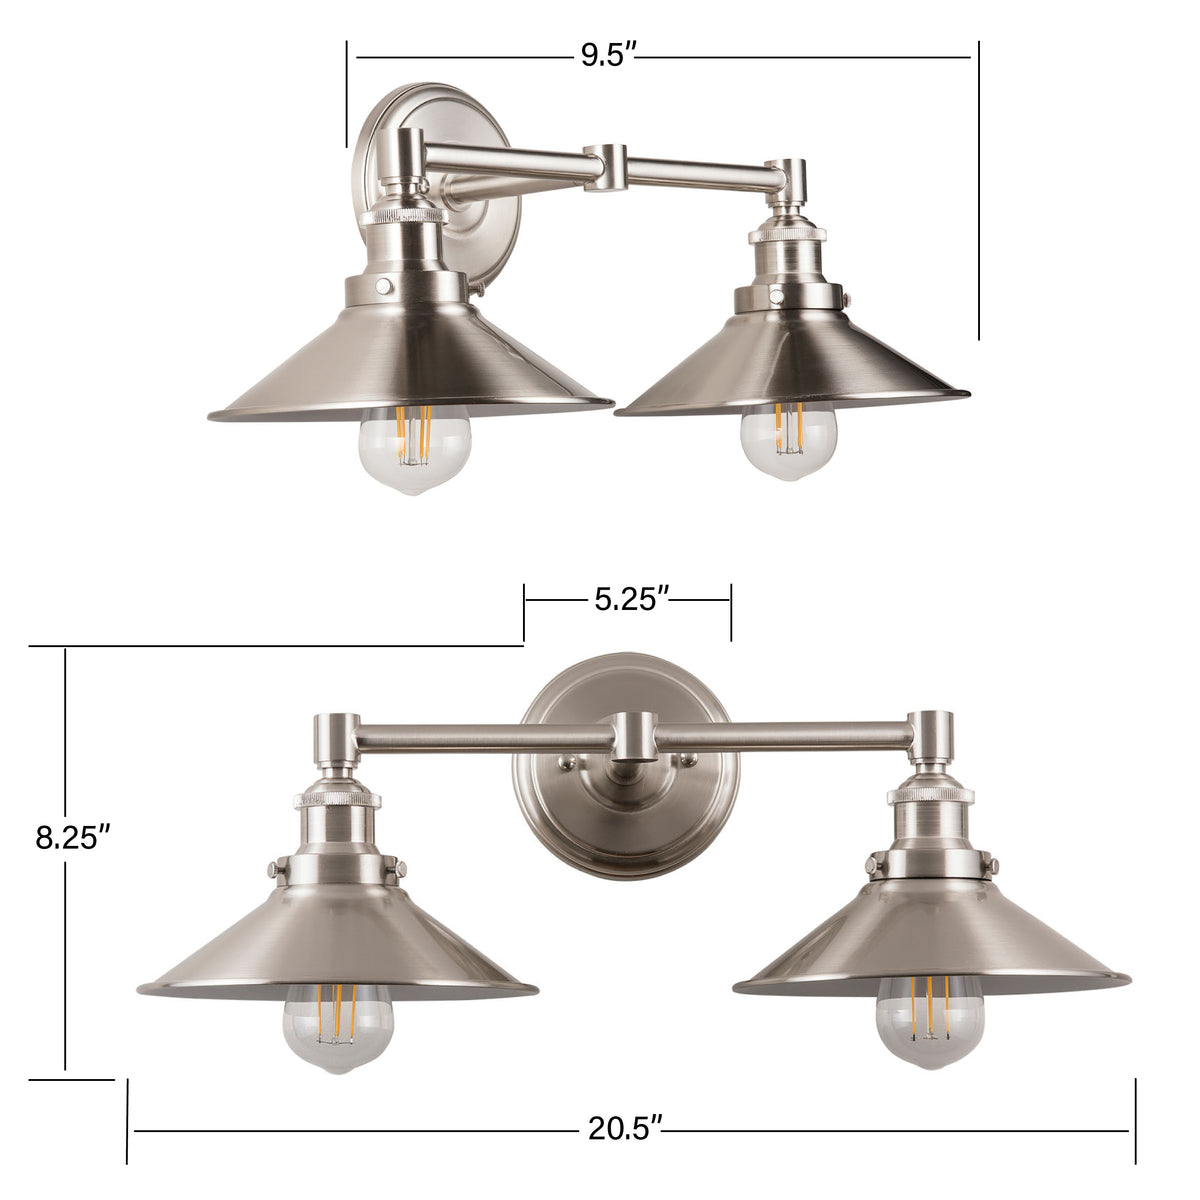 Andante LED Industrial Light Wall Sconce Brushed Nickel Linea di Liara LL-WL437-BN - 3